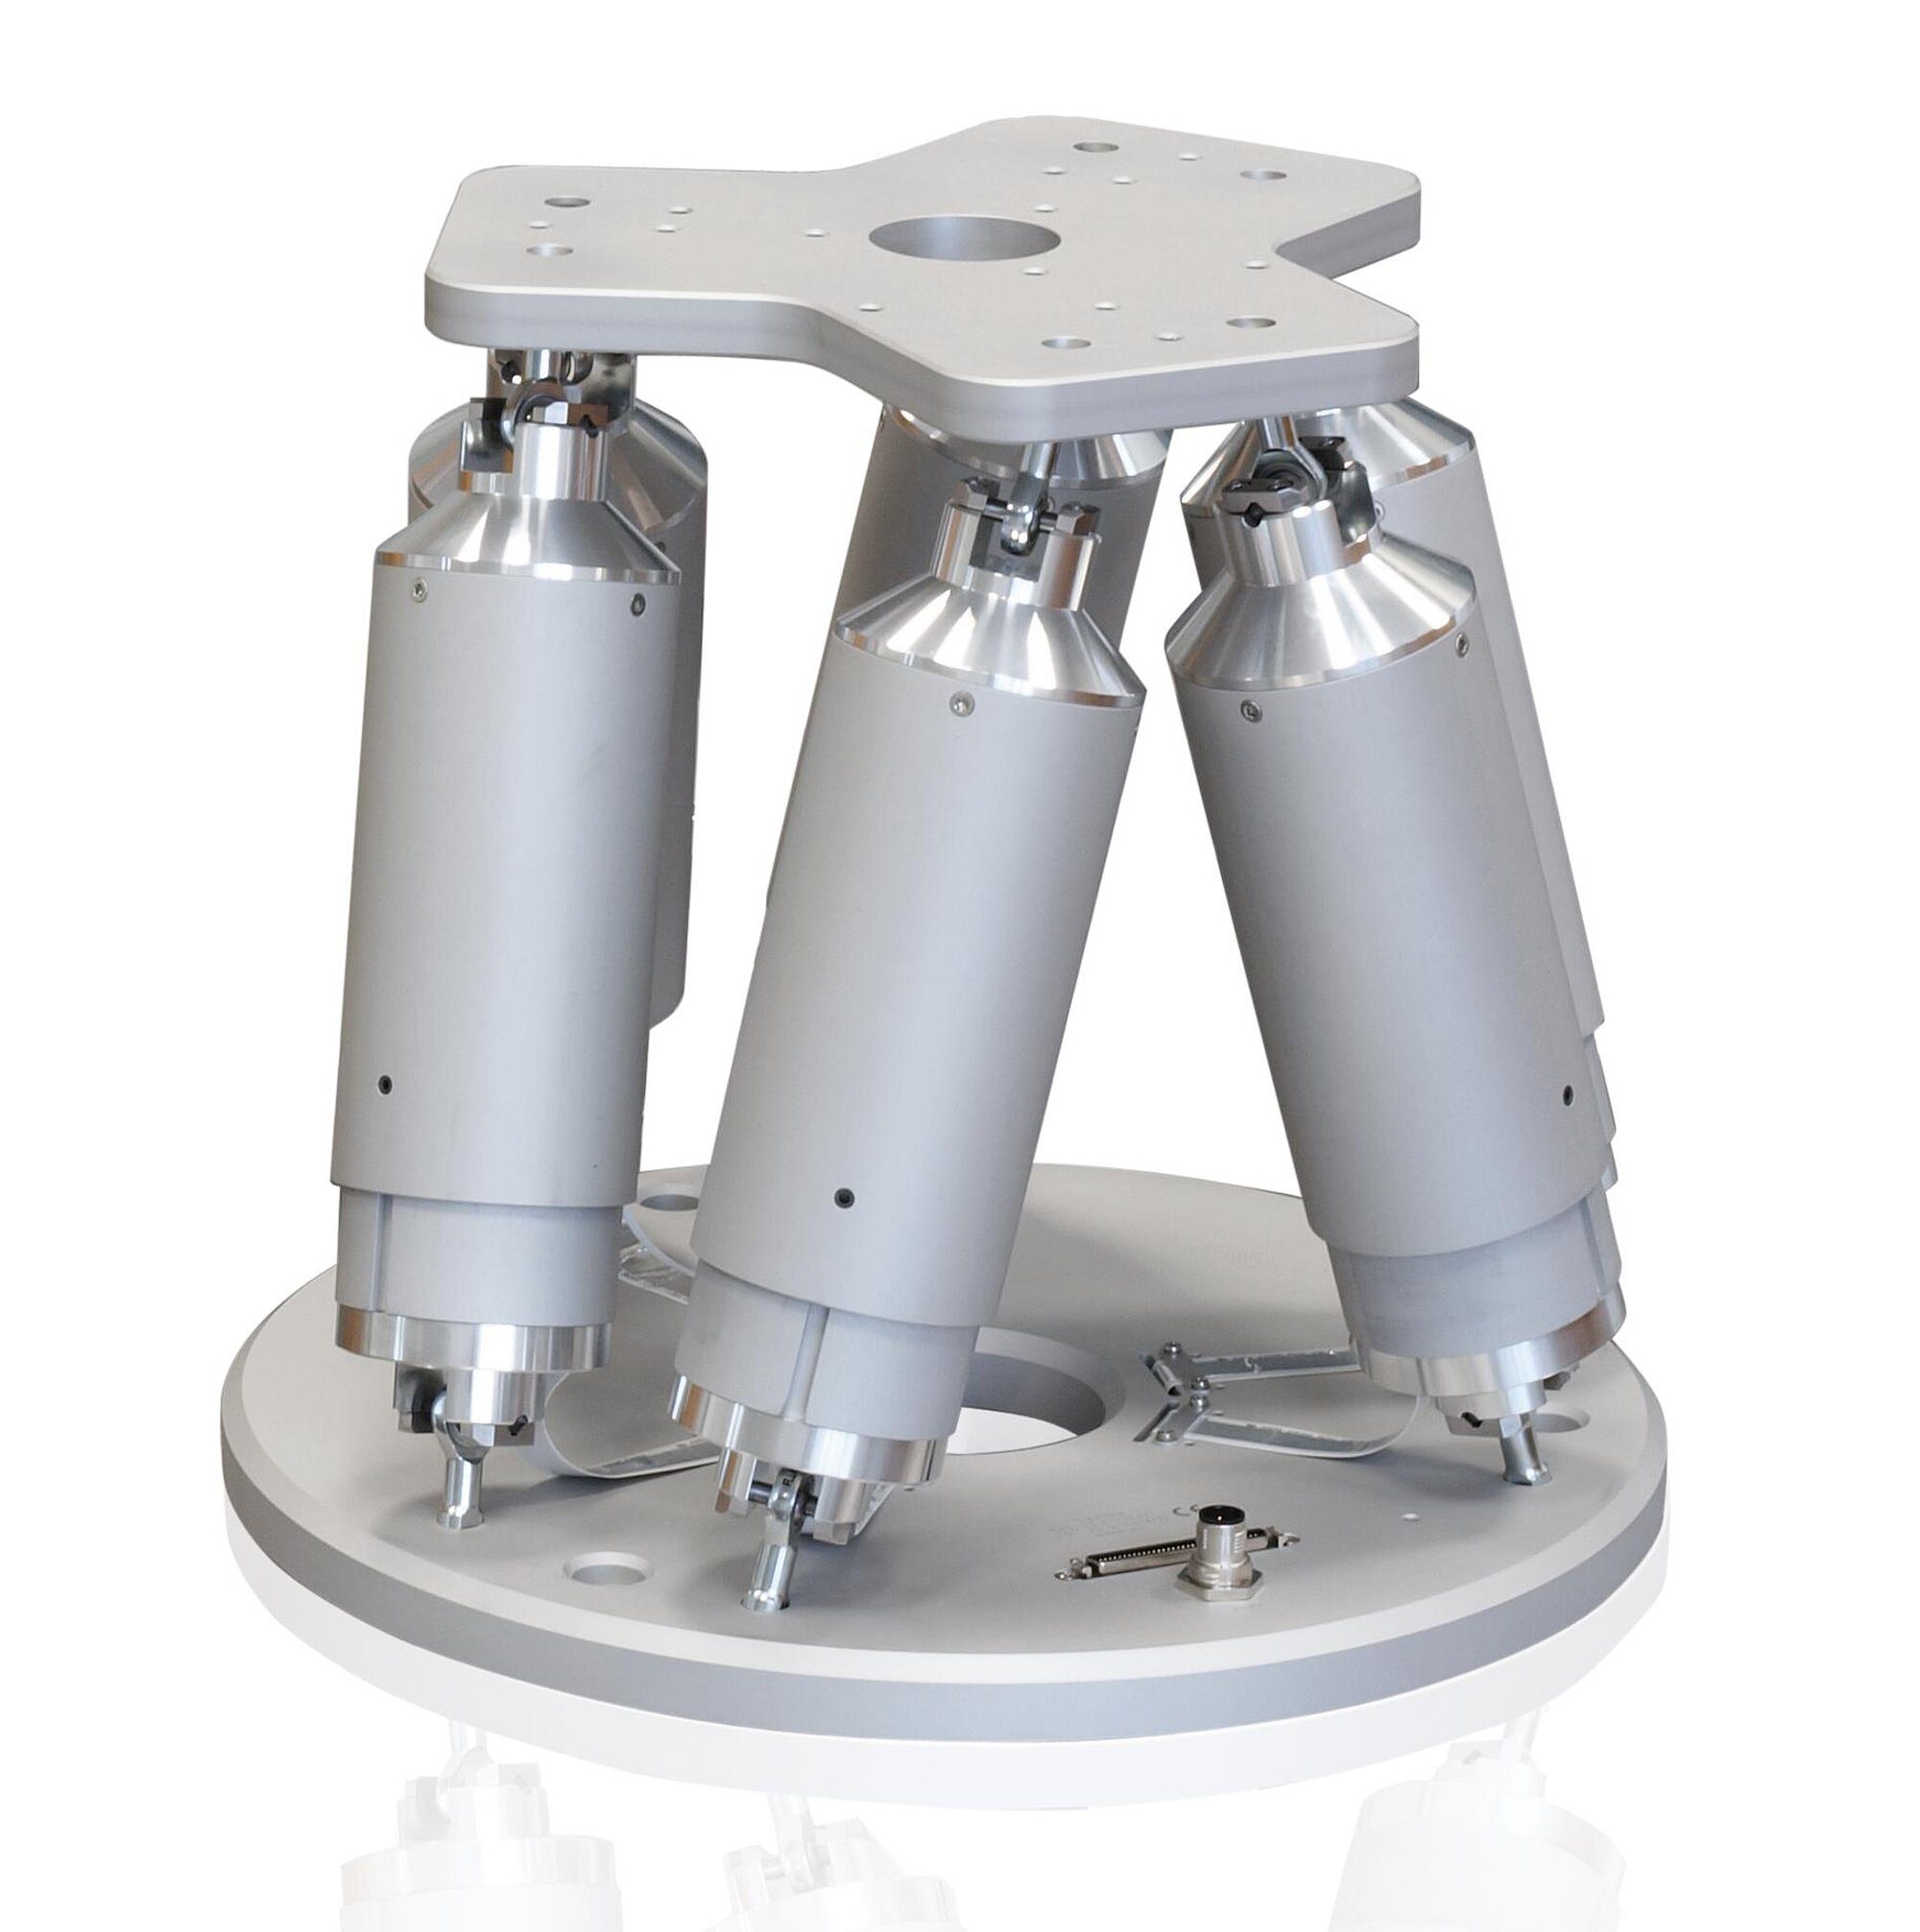 Physik Instrument-H-820 6-Axis Hexapod Cost-Effective Hexapod